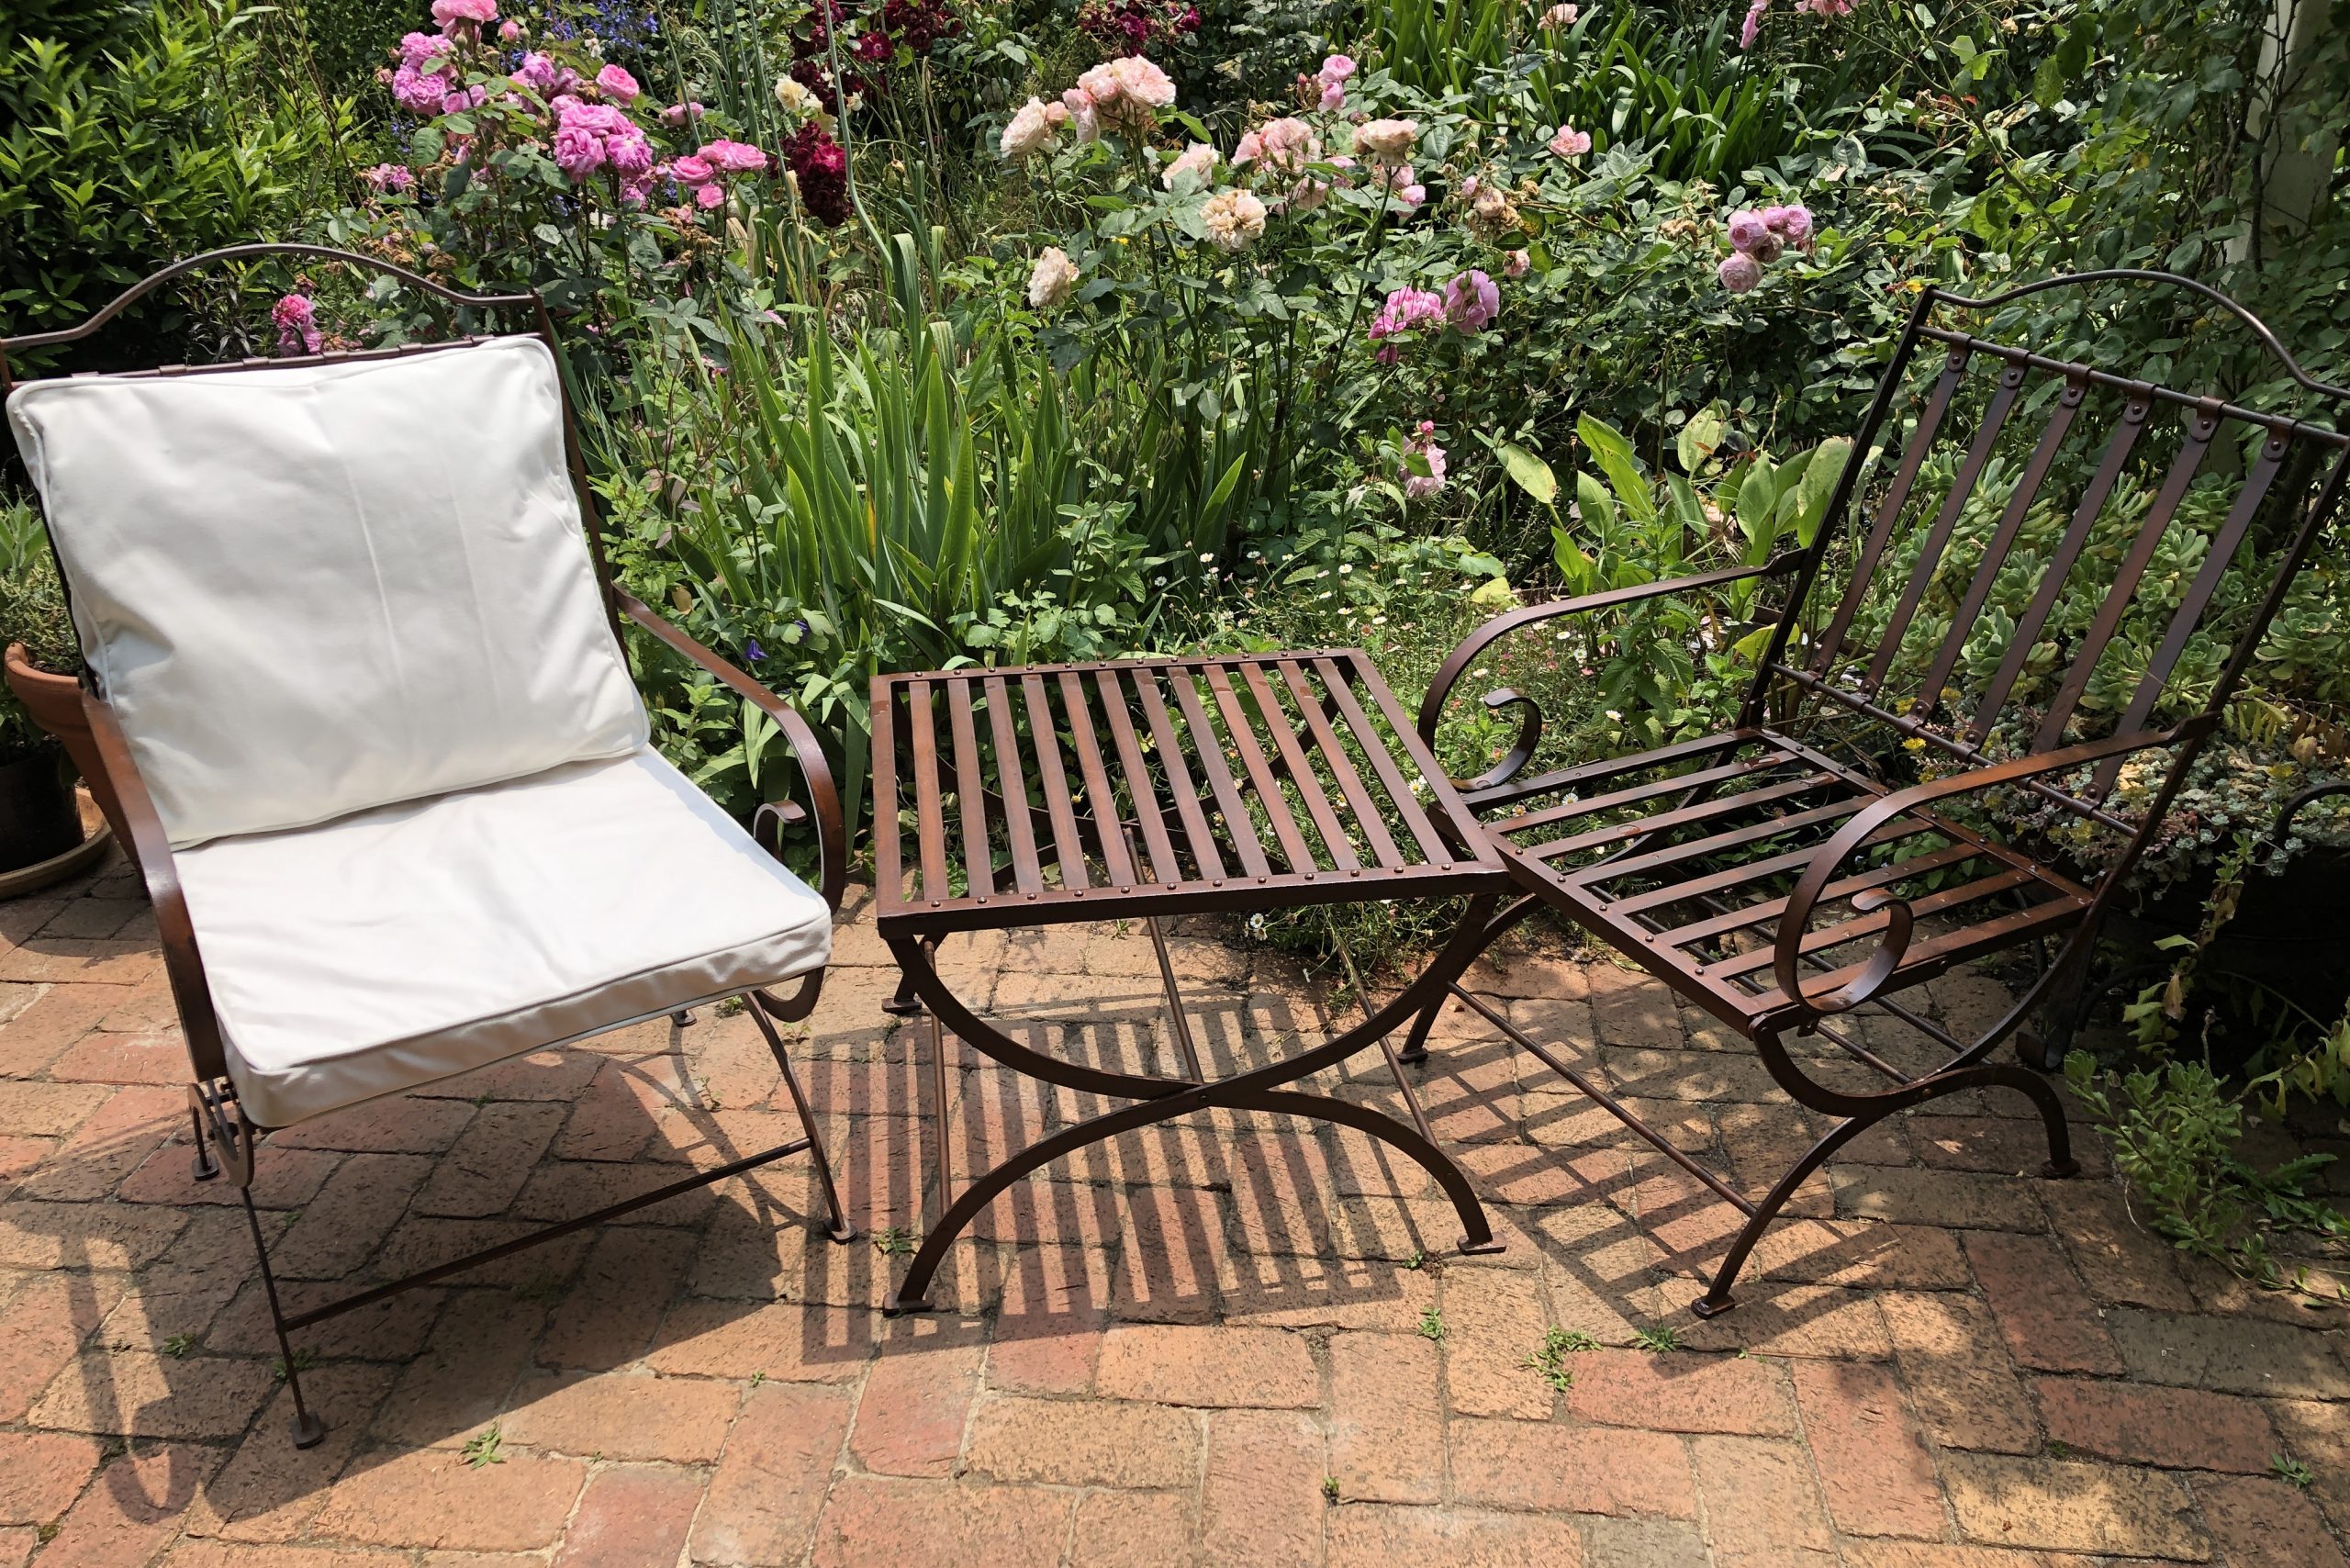 wrought iron chairs and table in a garden